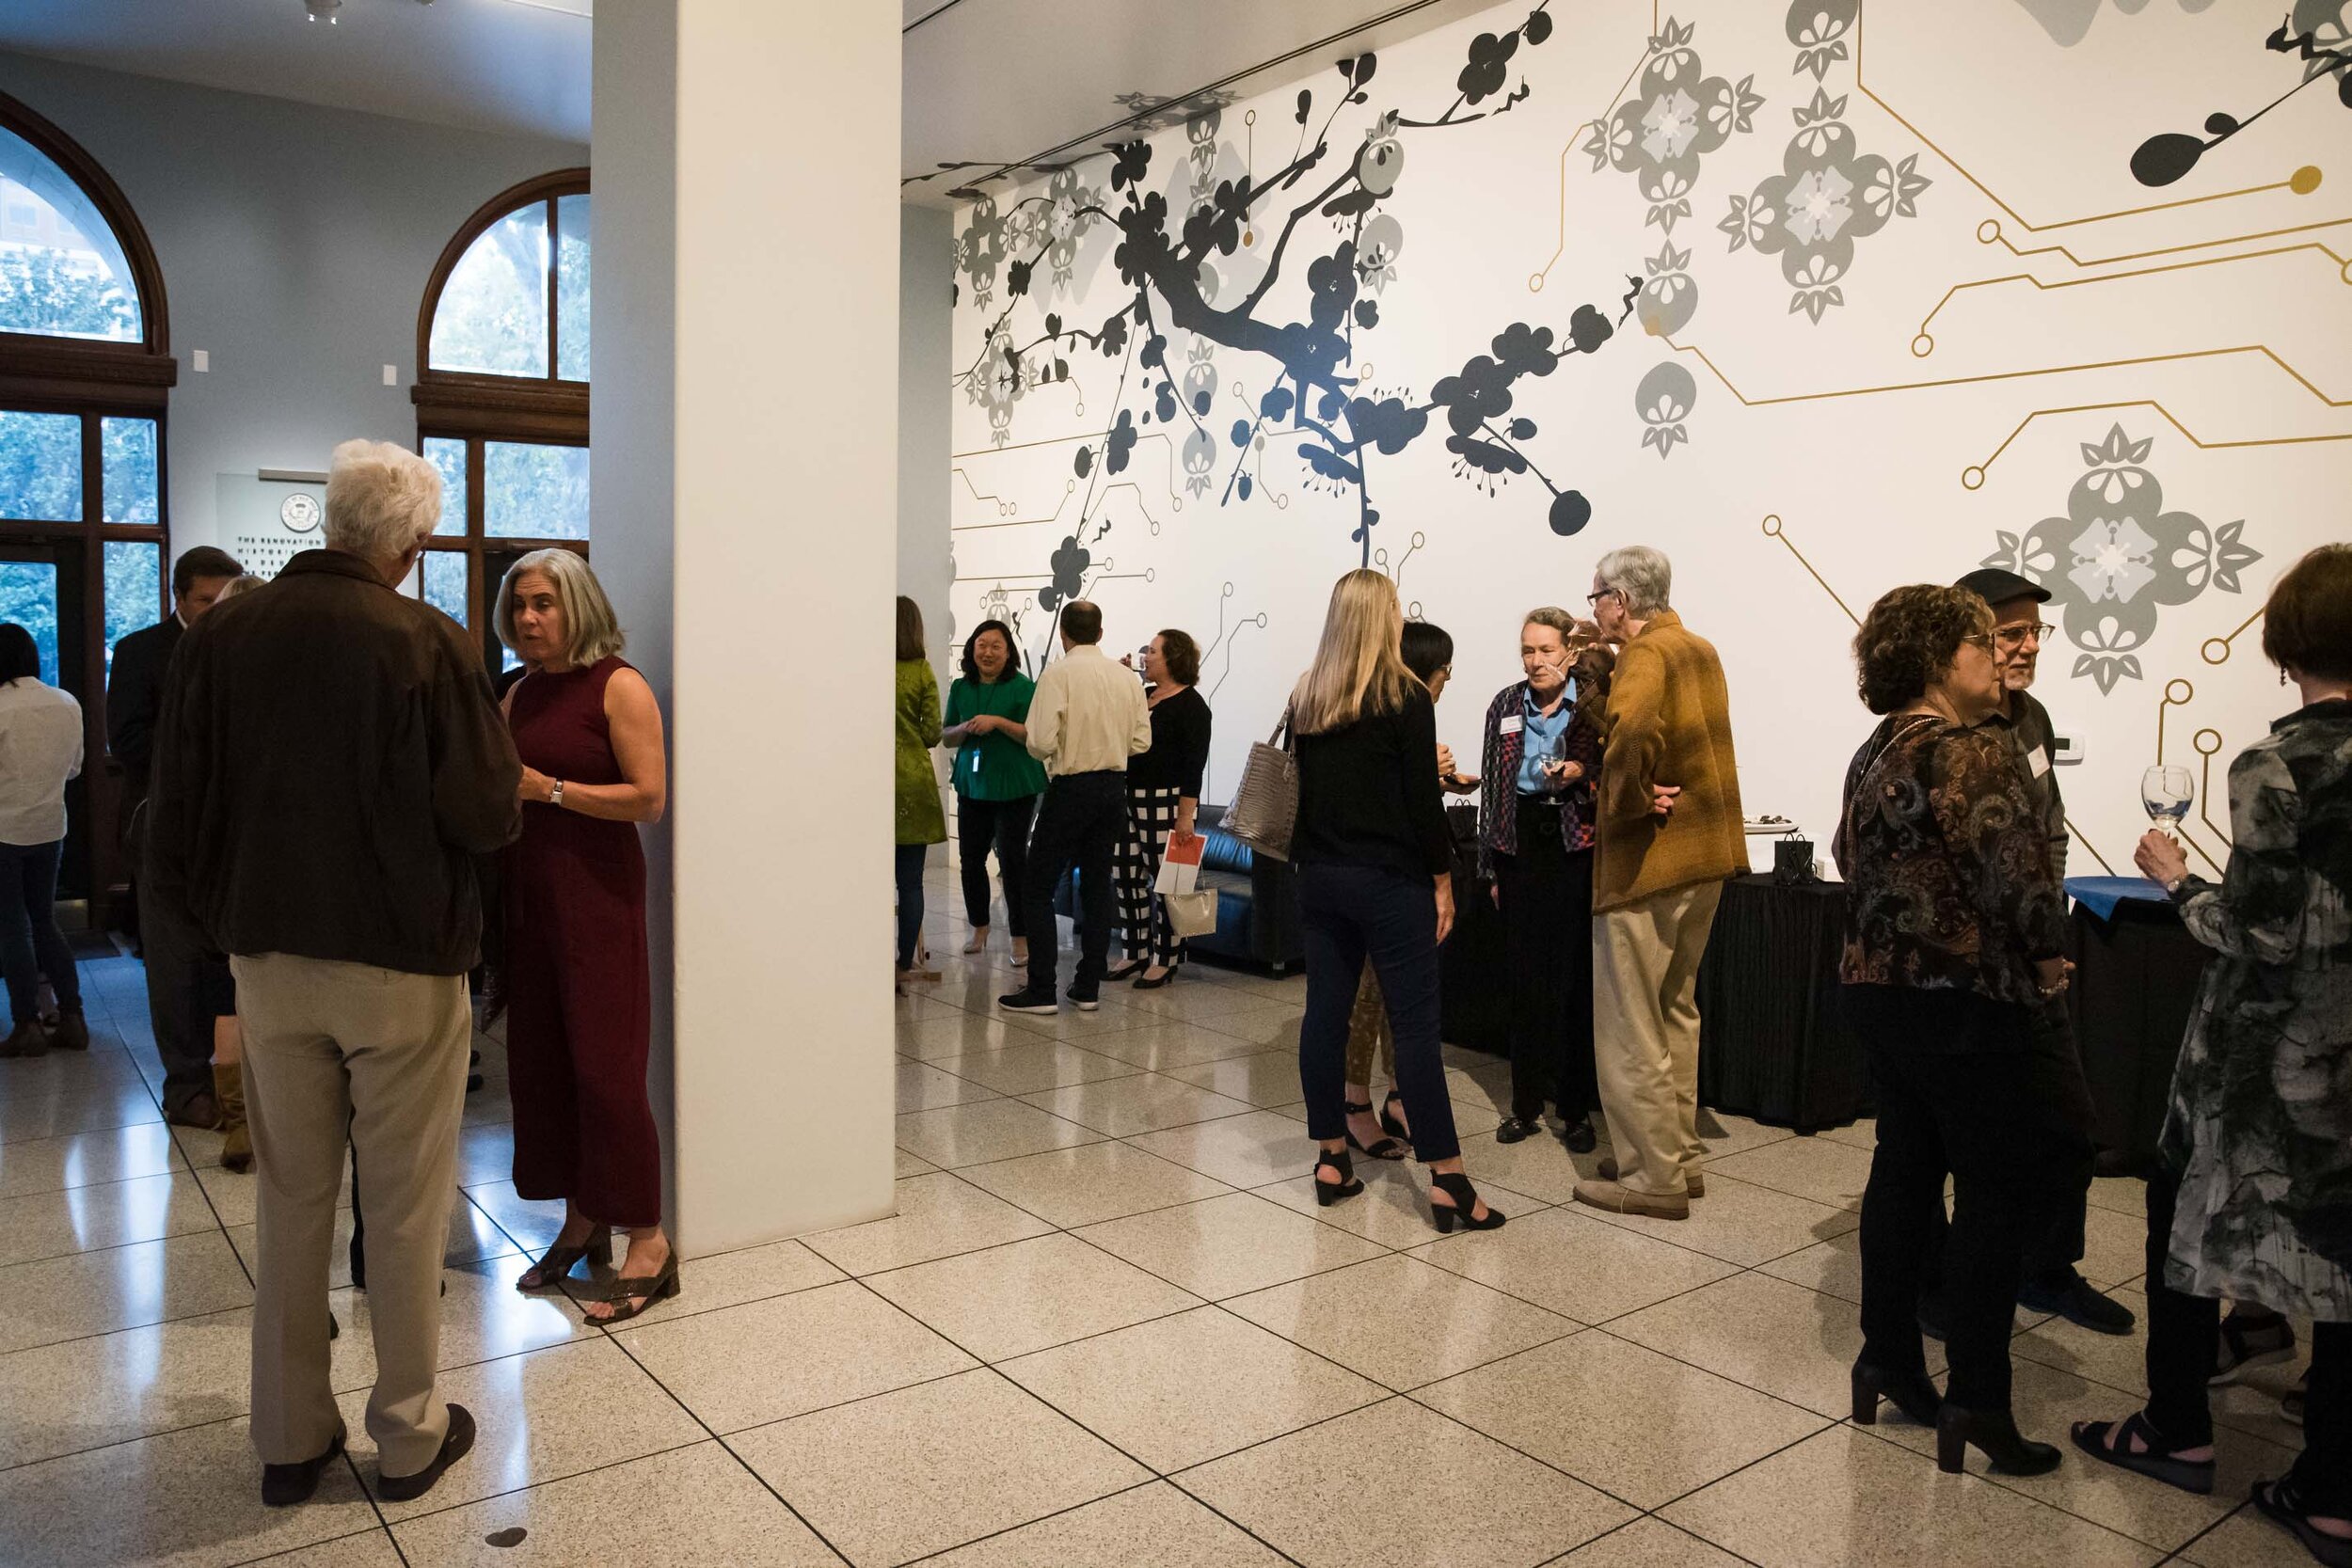 69_GalaAuctionPreview_9.16.19_photo_SharonKenney.jpg